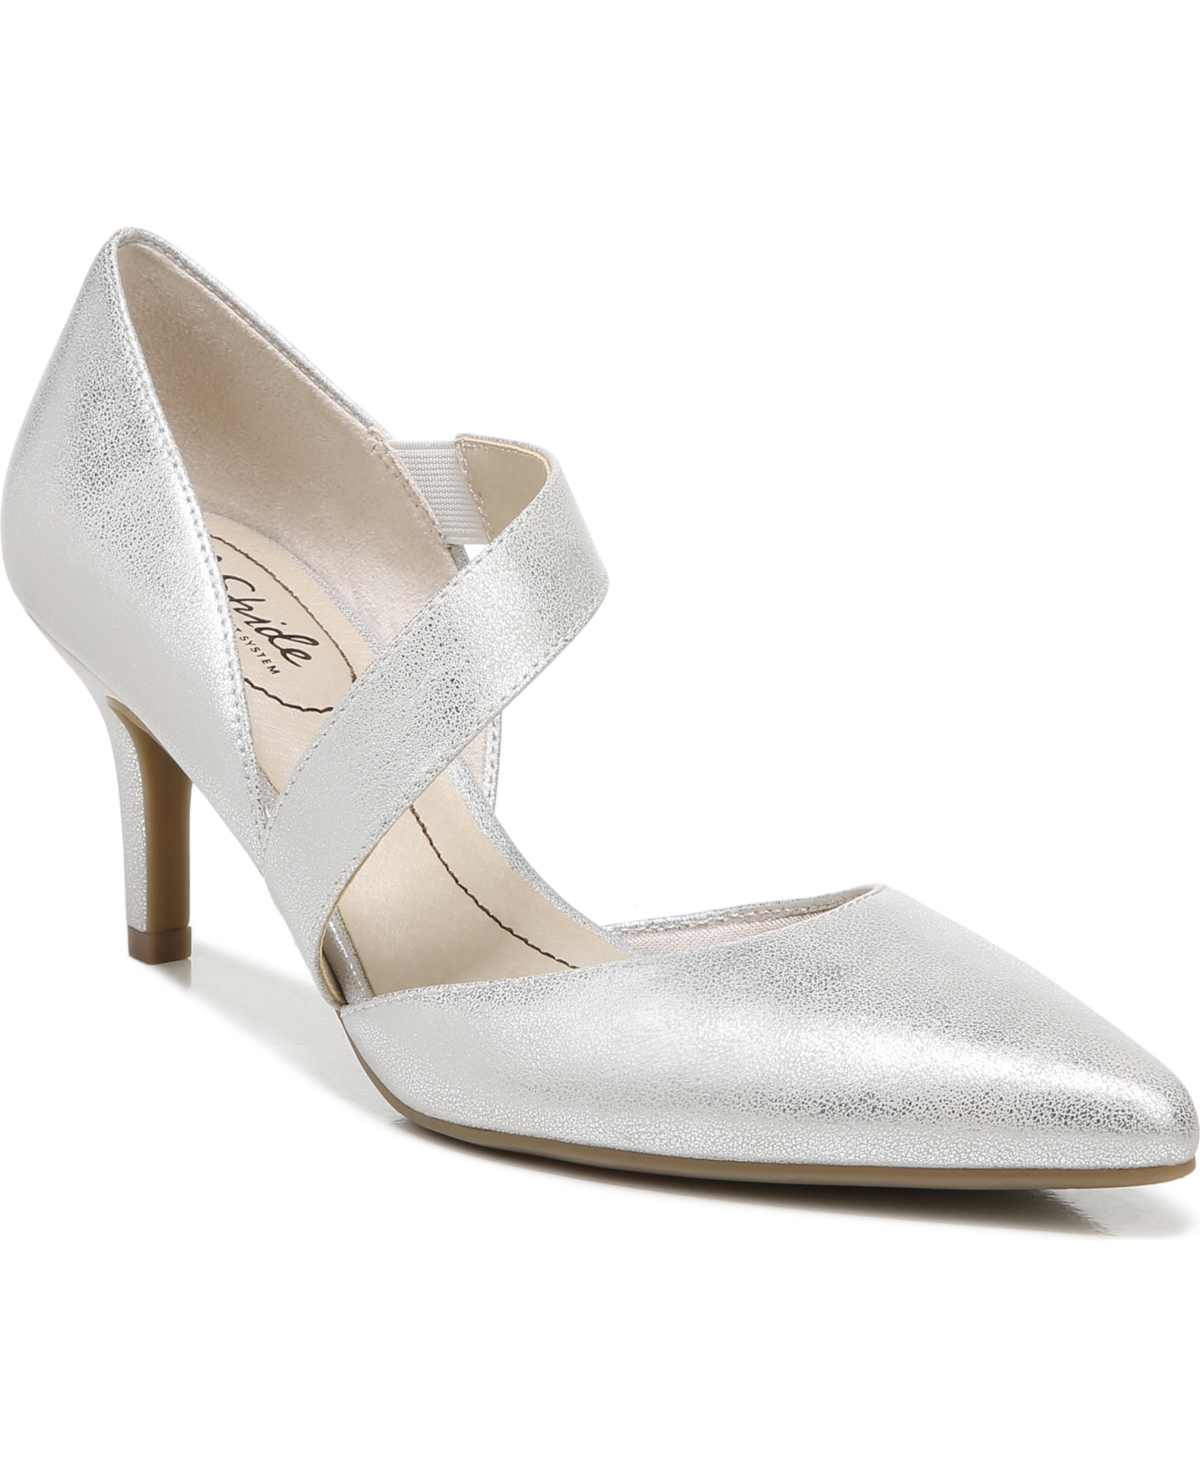 Lifestride Suki Pumps In Silver Faux Leather